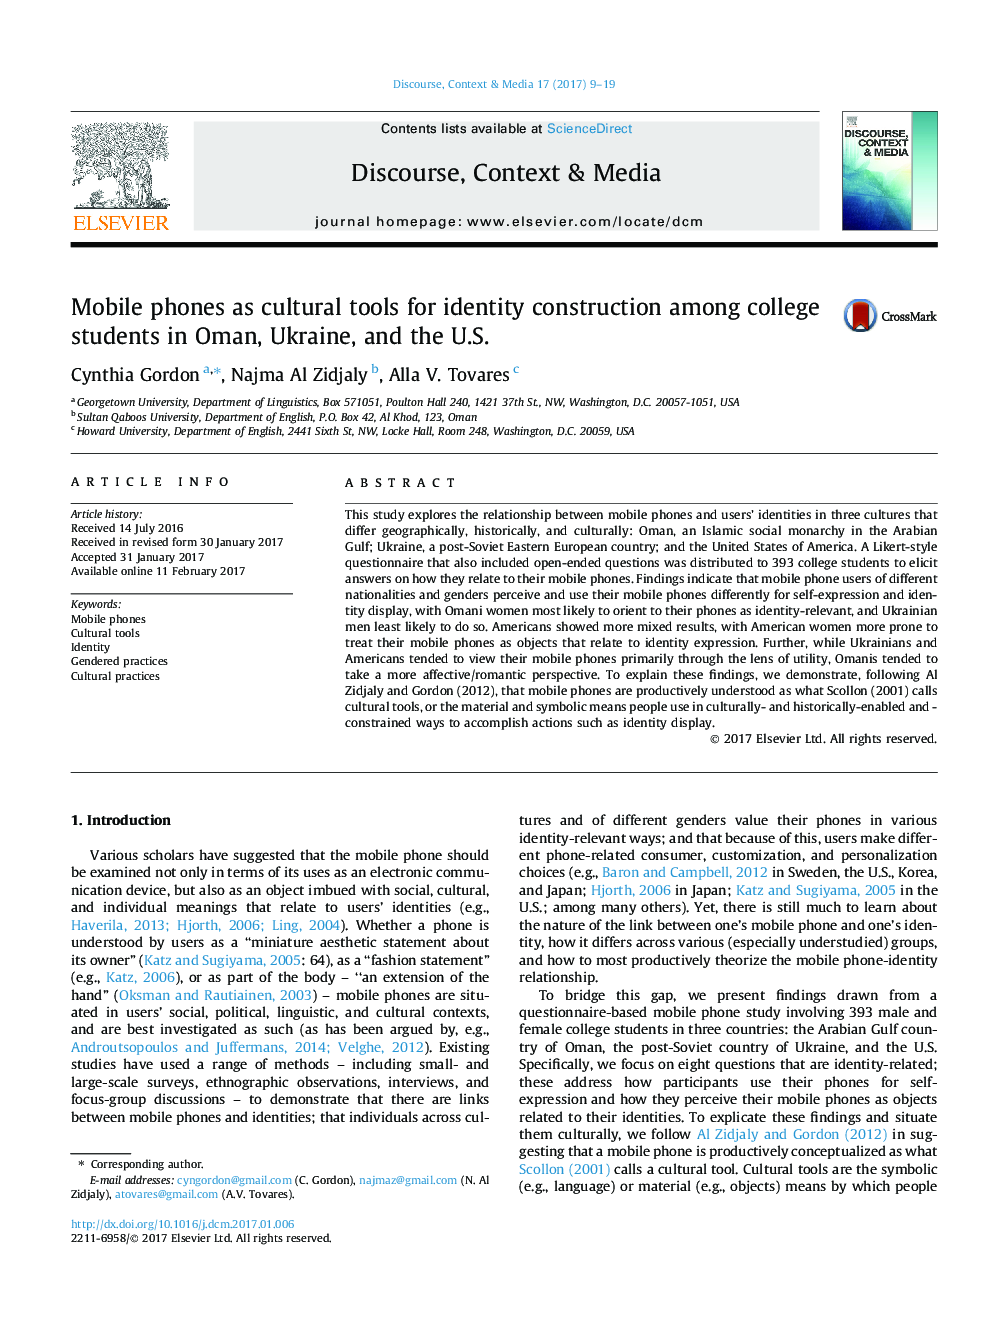 Mobile phones as cultural tools for identity construction among college students in Oman, Ukraine, and the U.S.